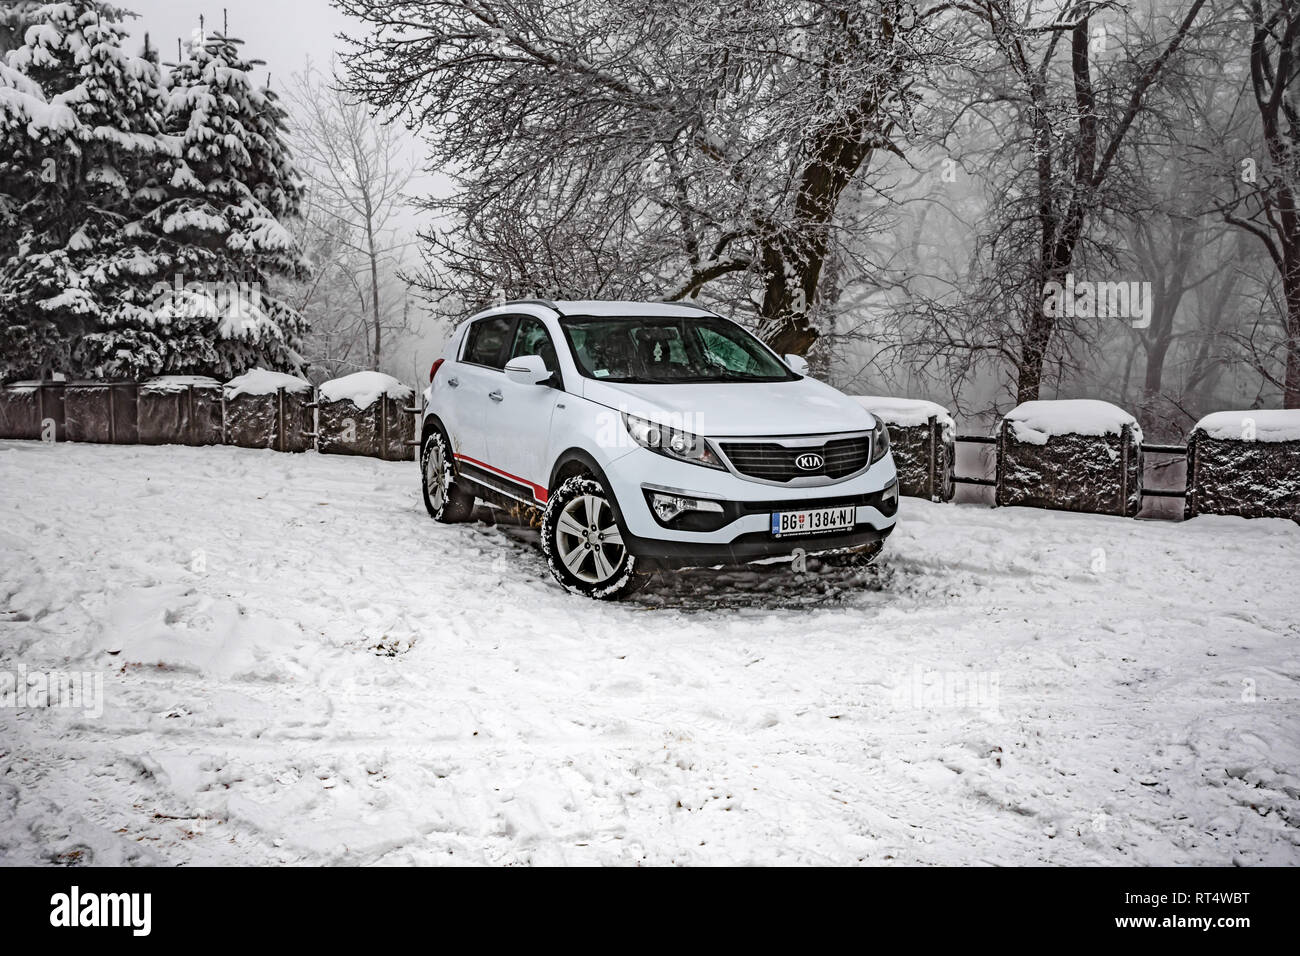 Kia Sportage 2.0 CRDI awd or 4x4, white color, in a forest road, covered with deep snow and ice. Extreme conditions and temperatures below -10 Stock Photo